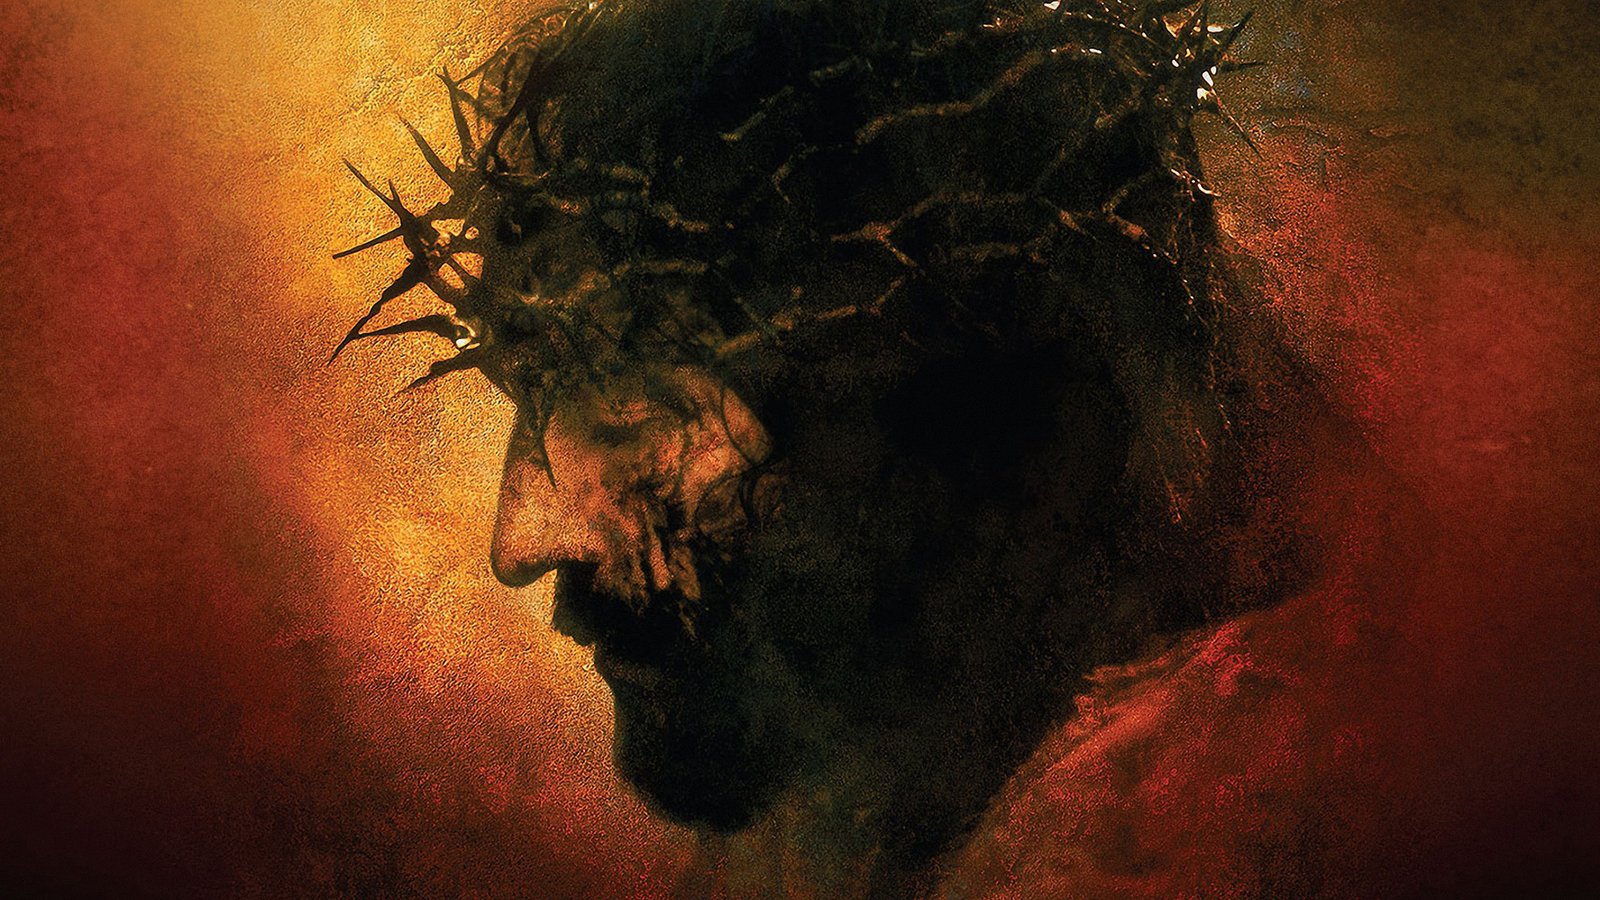  / The Passion of the Christ